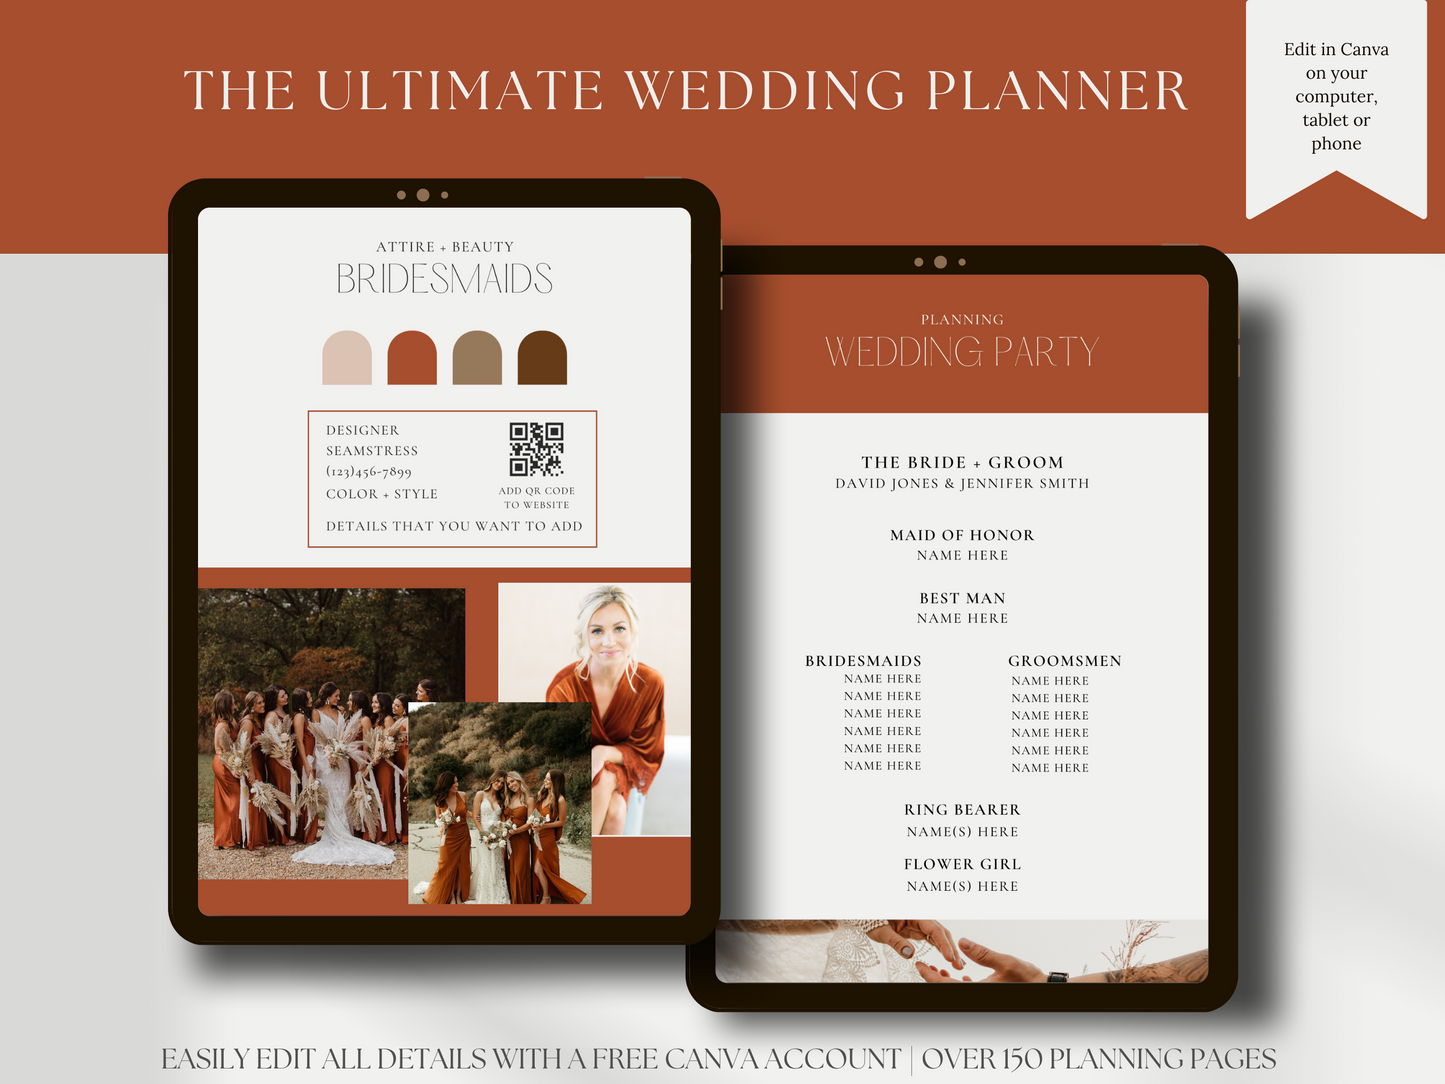 The Ultimate All In One Digital Wedding Planner In Terracotta